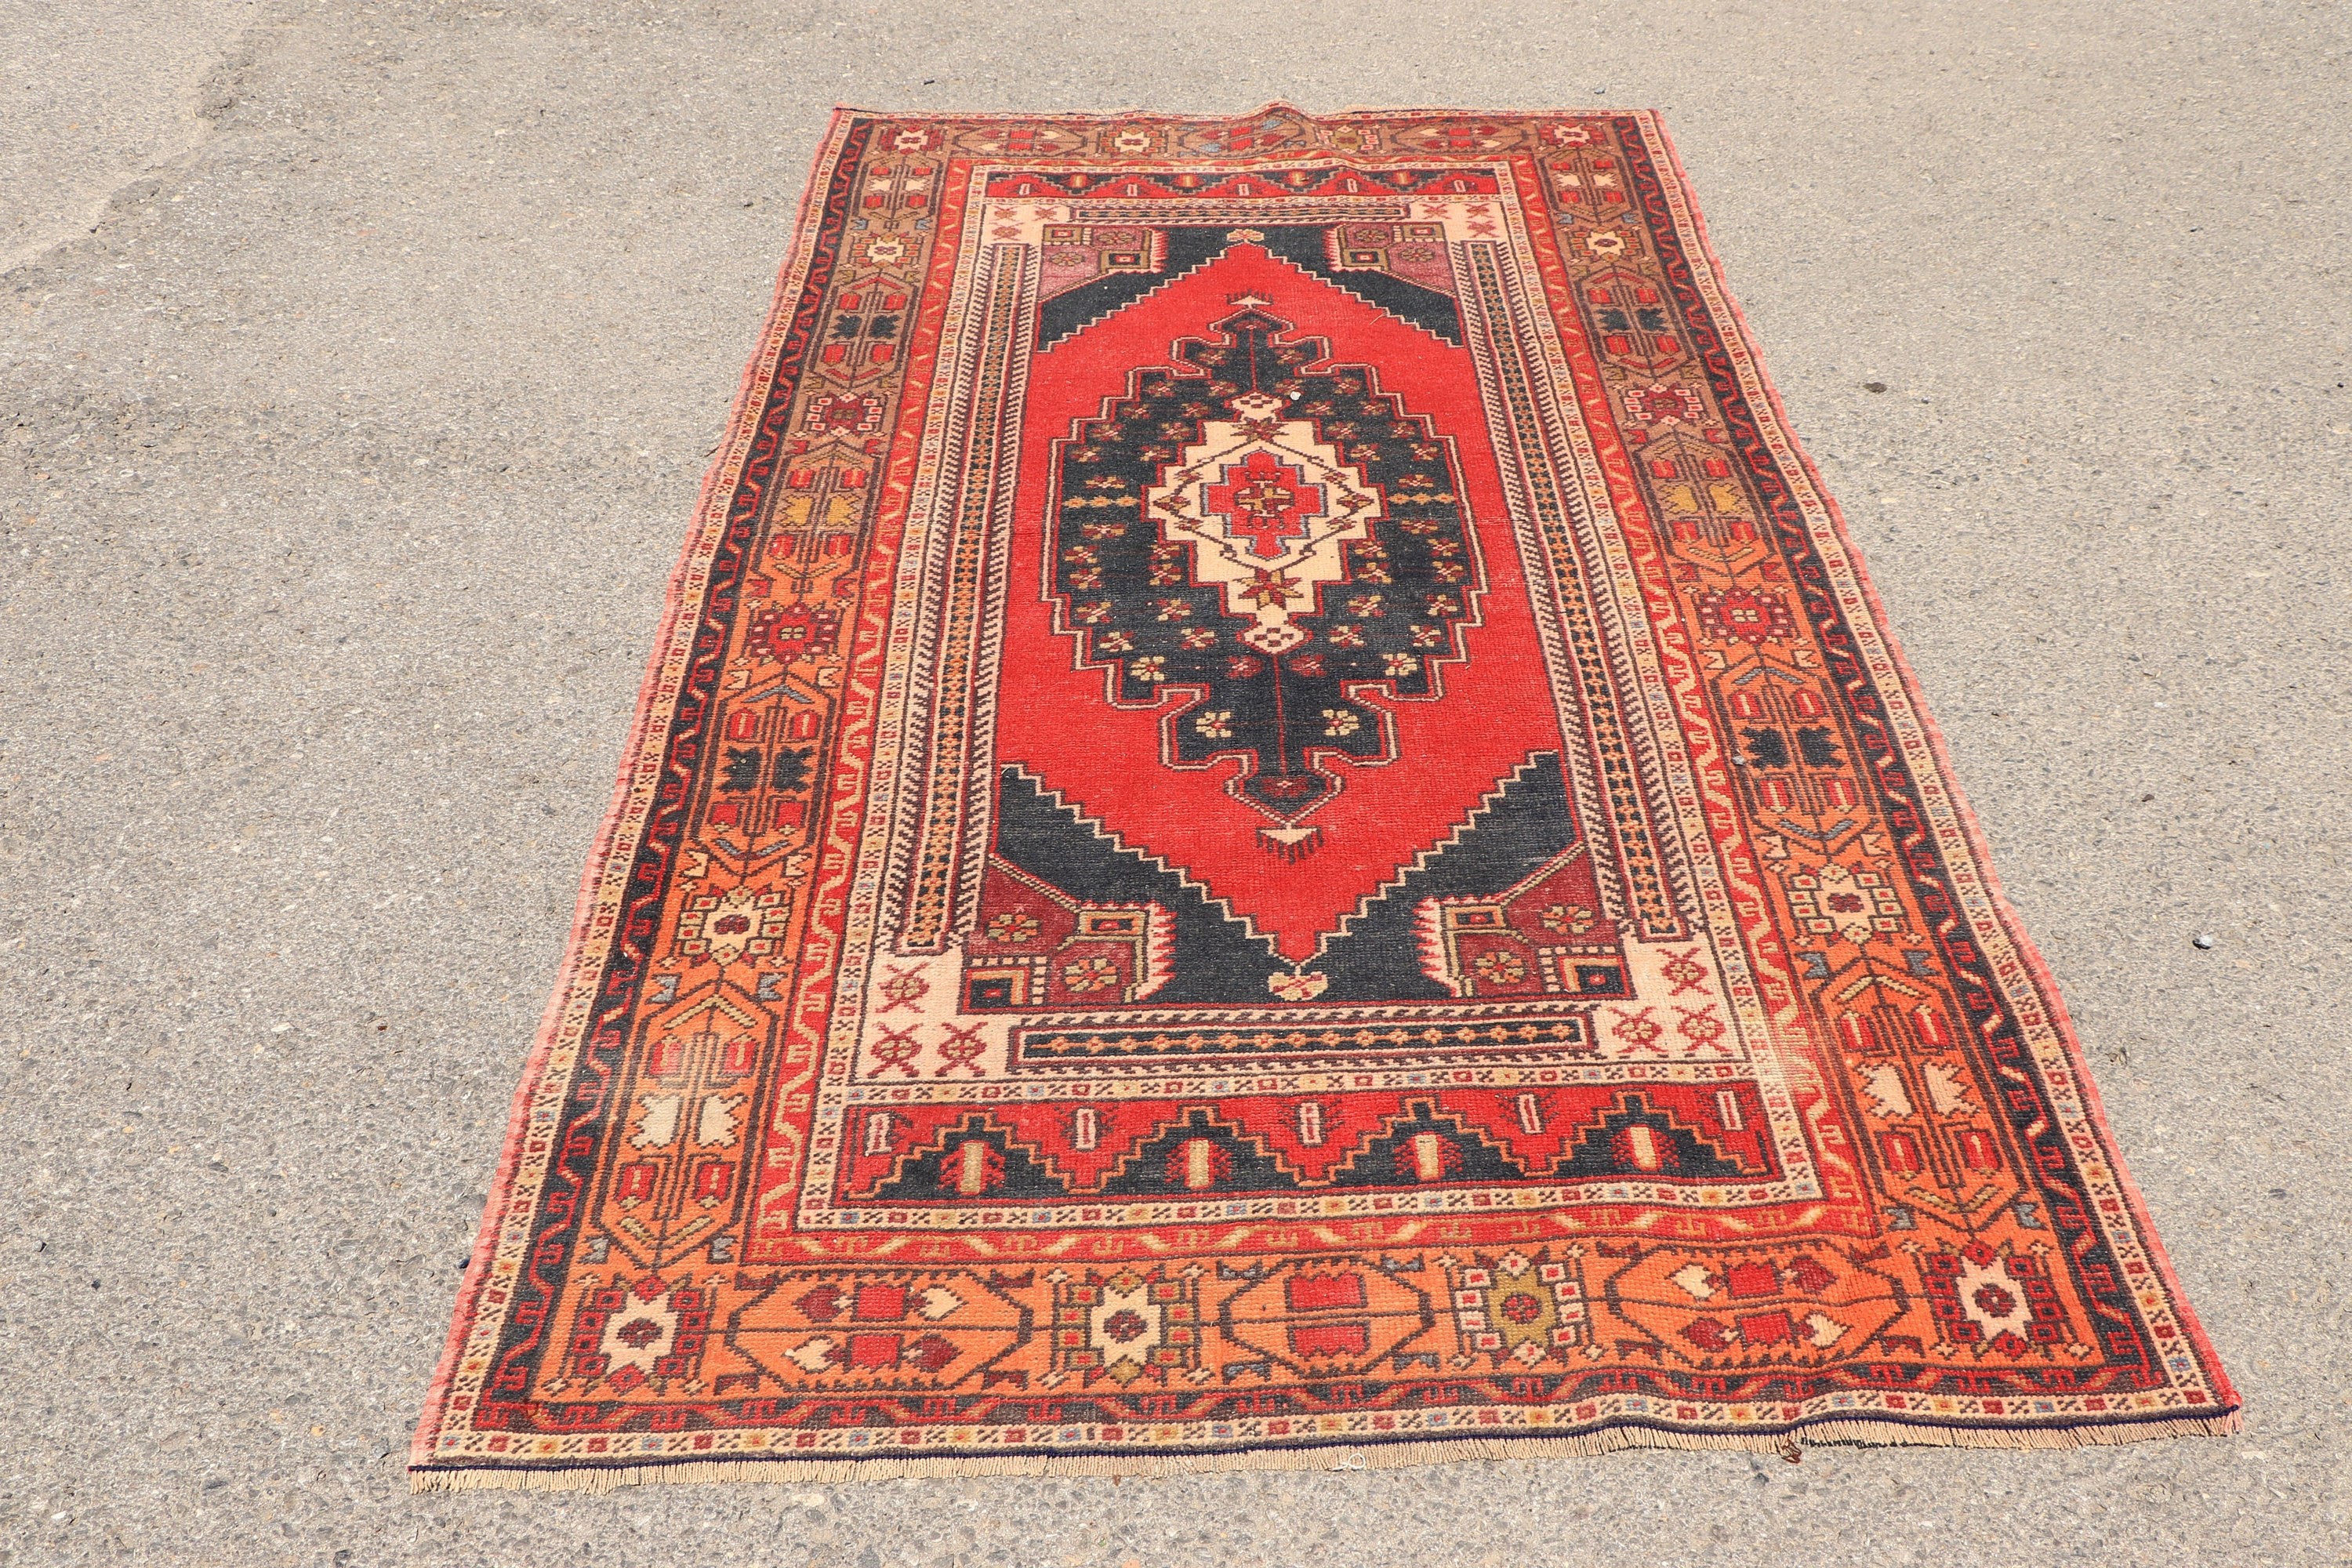 Home Decor Rug, Indoor Rugs, 4.1x8 ft Area Rugs, Turkish Rug, Red Anatolian Rugs, Pale Rug, Rugs for Dining Room, Vintage Rug, Moroccan Rug